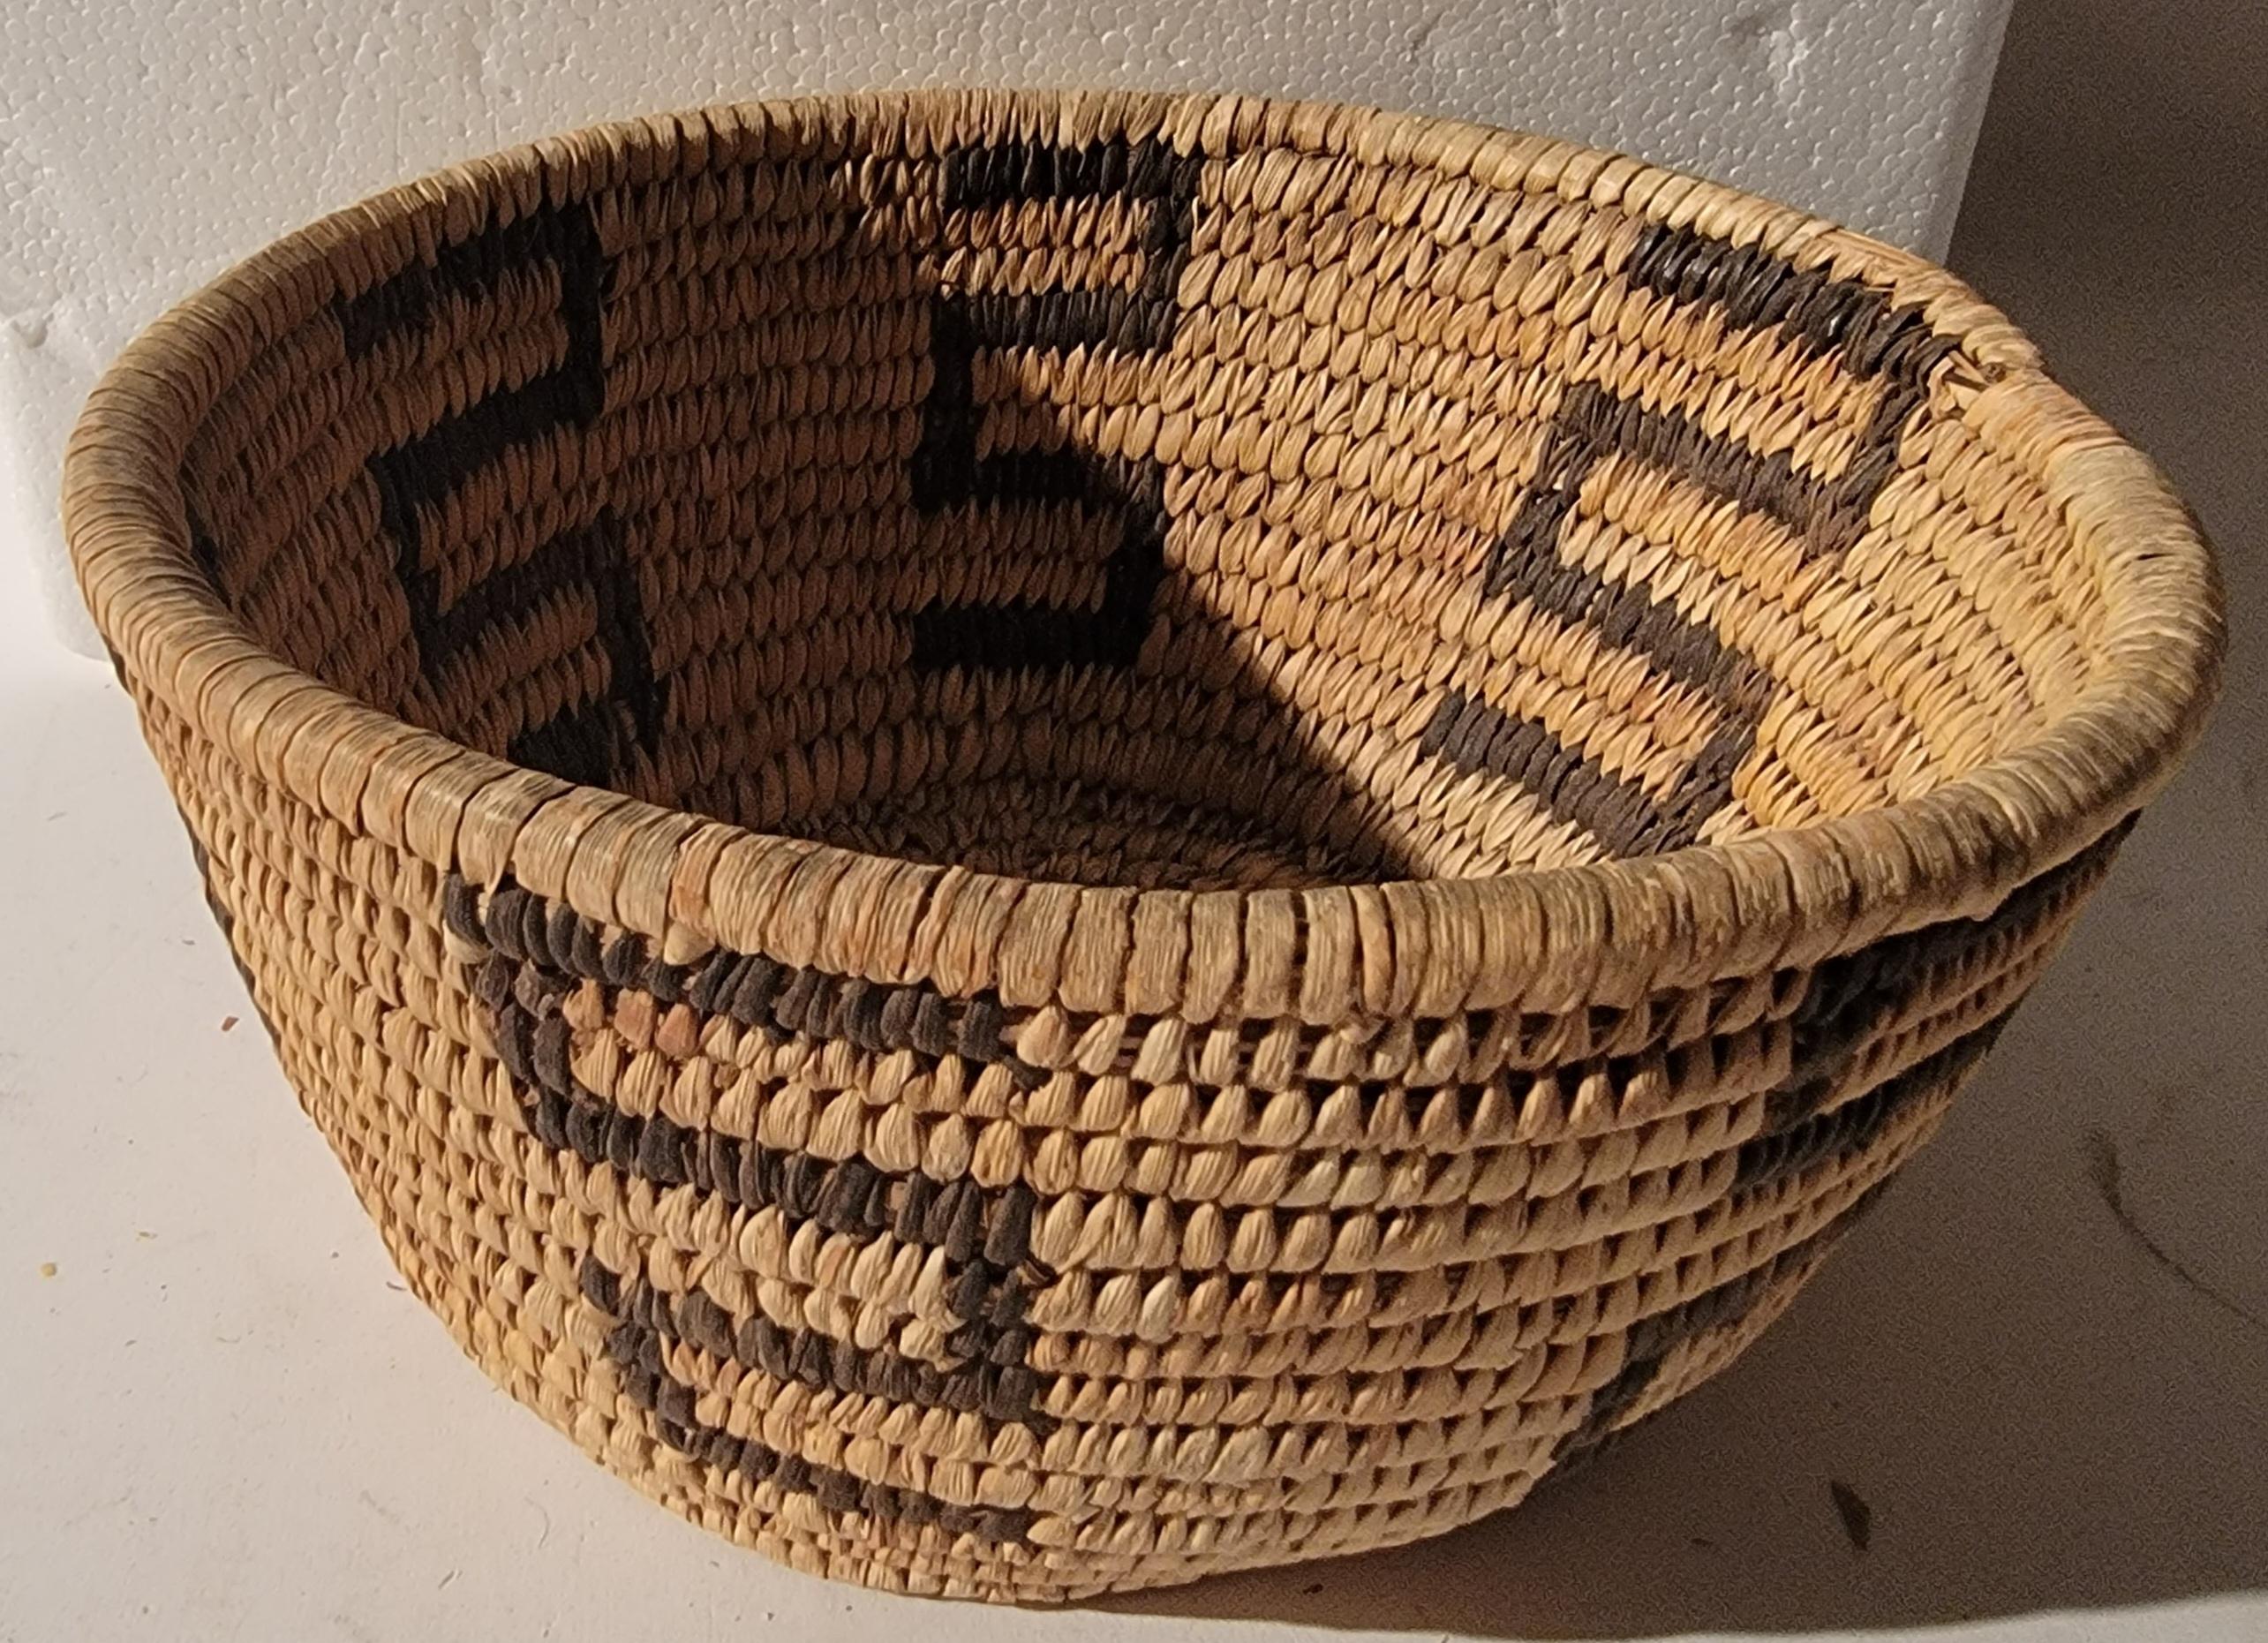 This collection of Pima baskets are all from a private Indian collection. 
All in fine condition. Sold as a group of four baskets.

Largest basket - 6x11

Medium basket -6x10
small basket -5x8
Basket with handle - 5x8.